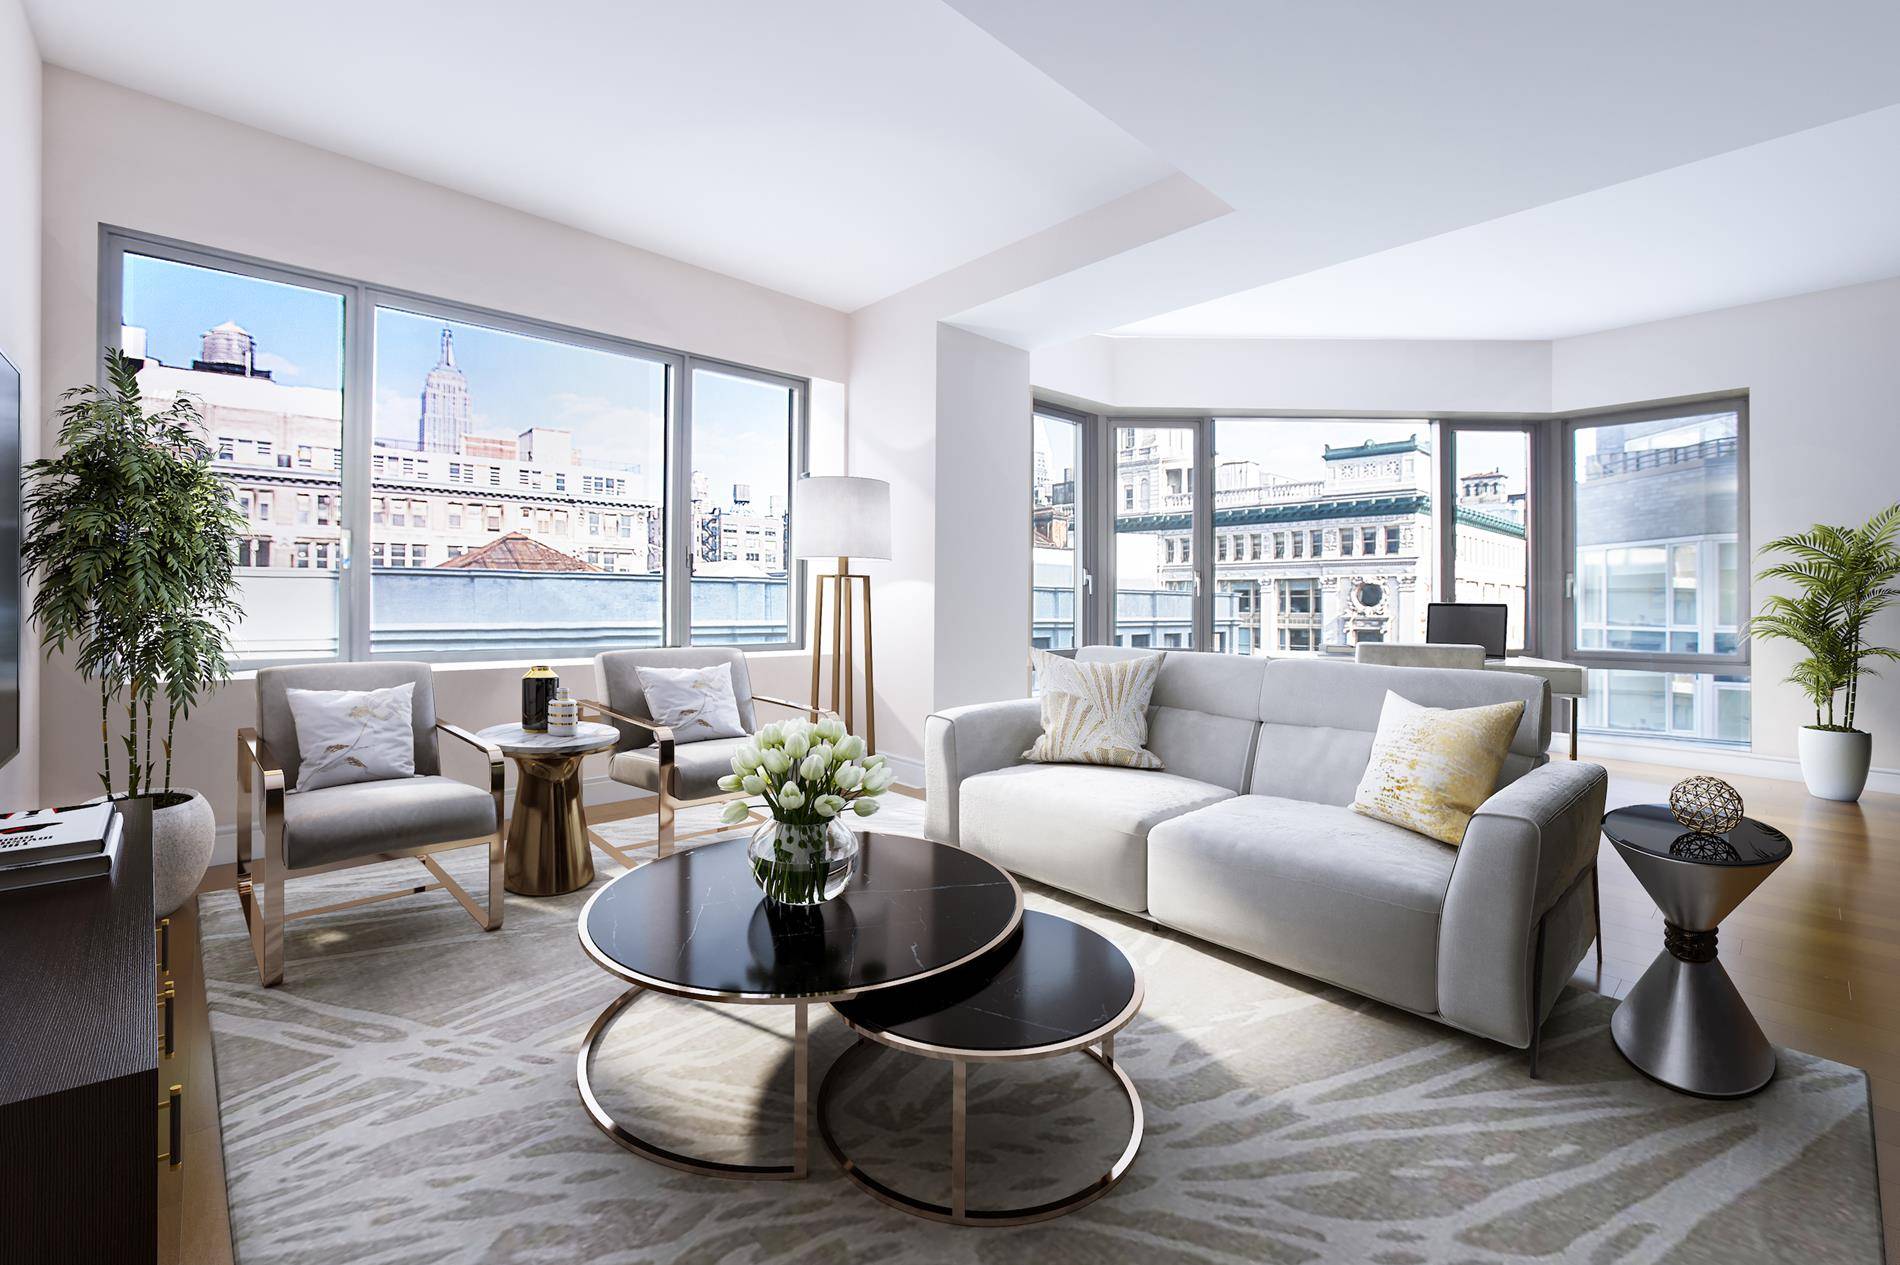 Residence 6A at 100 West 18th Street is an OVERSIZED 1745sf 2 bedroom and 3 bathroom units in one of Chelsea's most desirable condominiums.